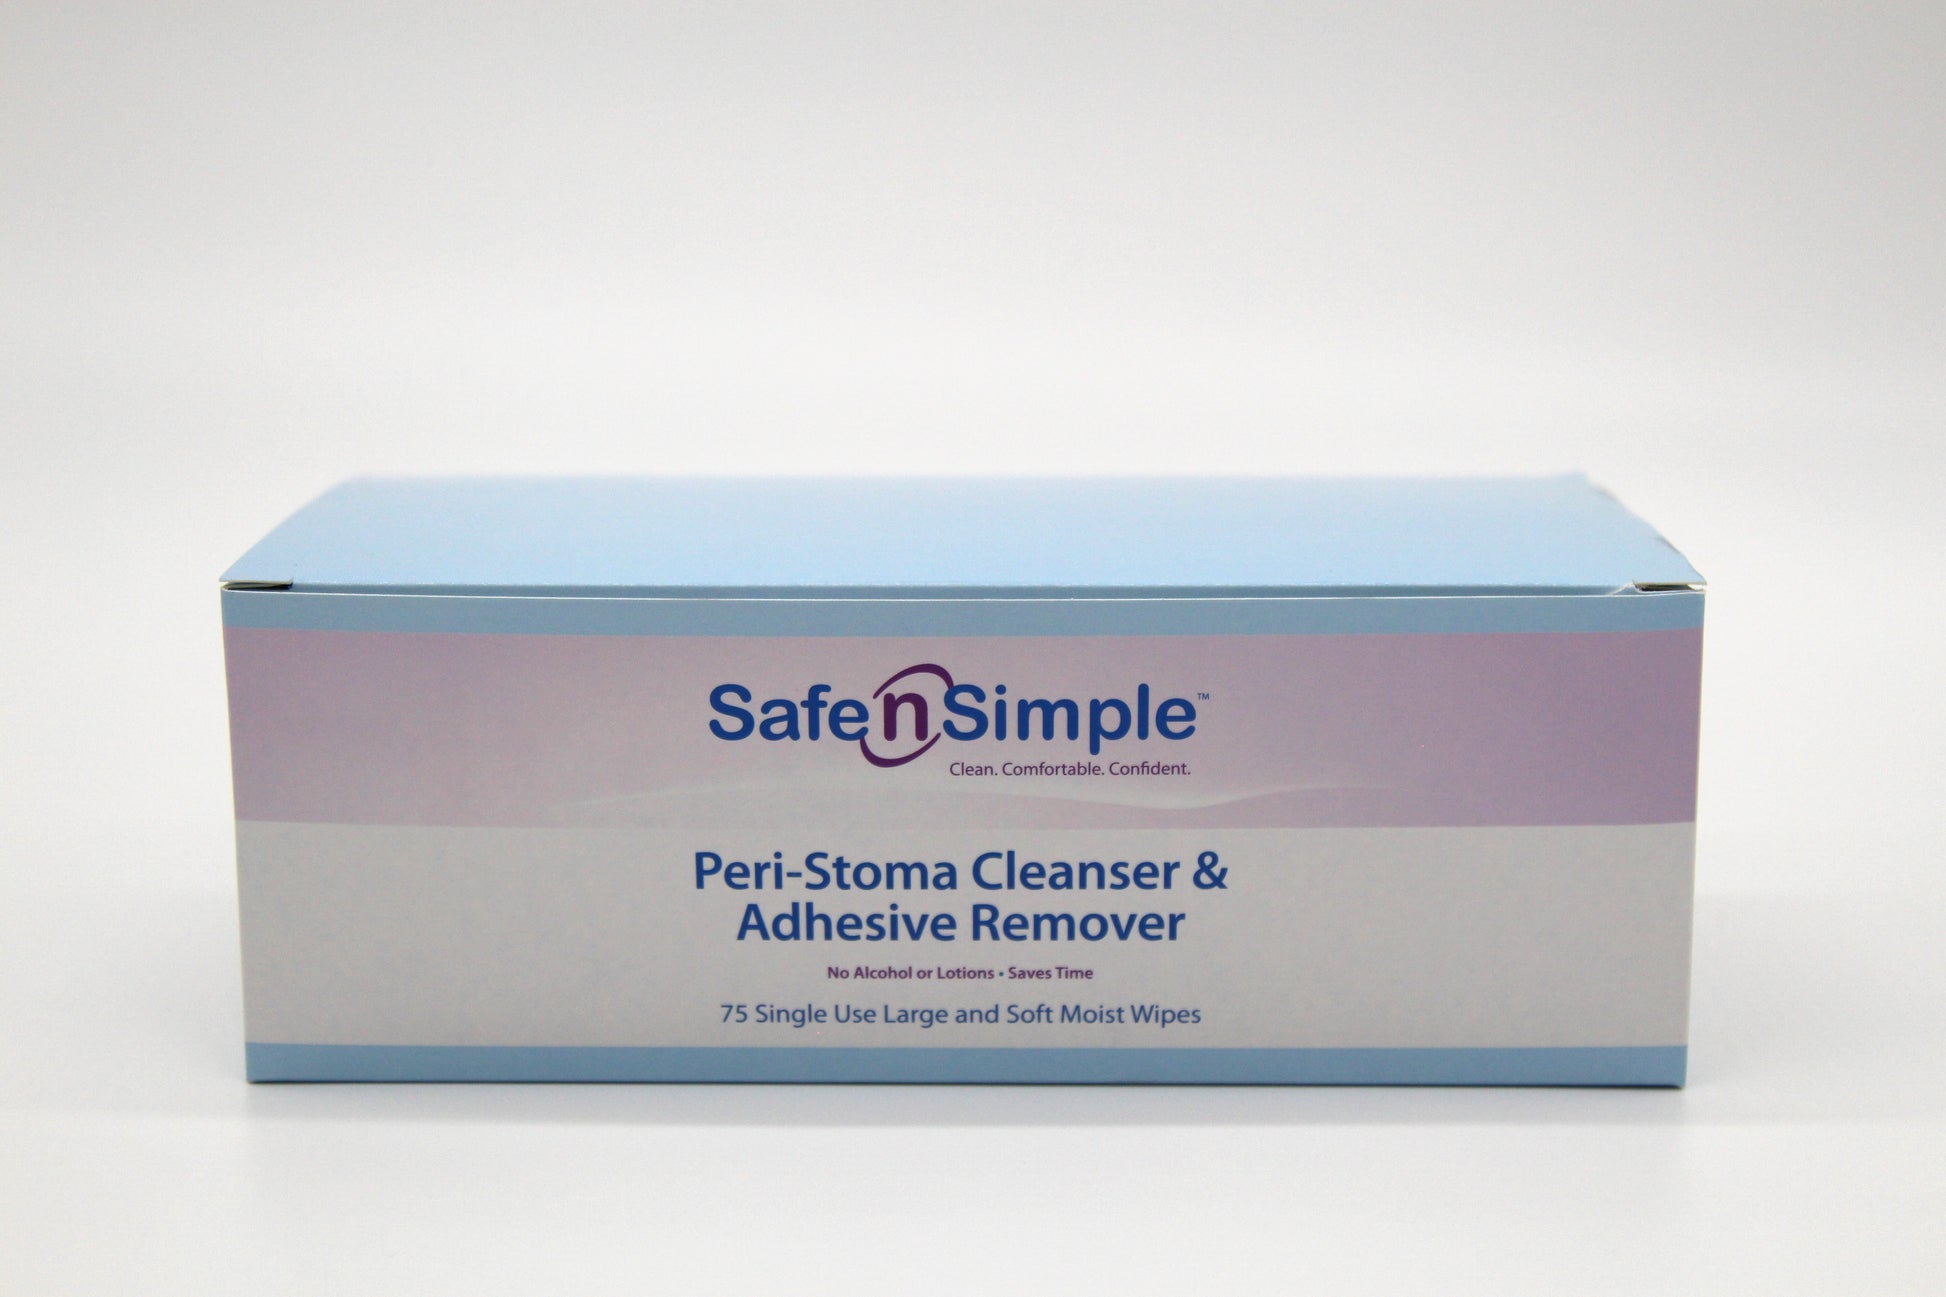 Safe n Simple No Sting Peri-Stoma Cleanser & Adhesive Remover